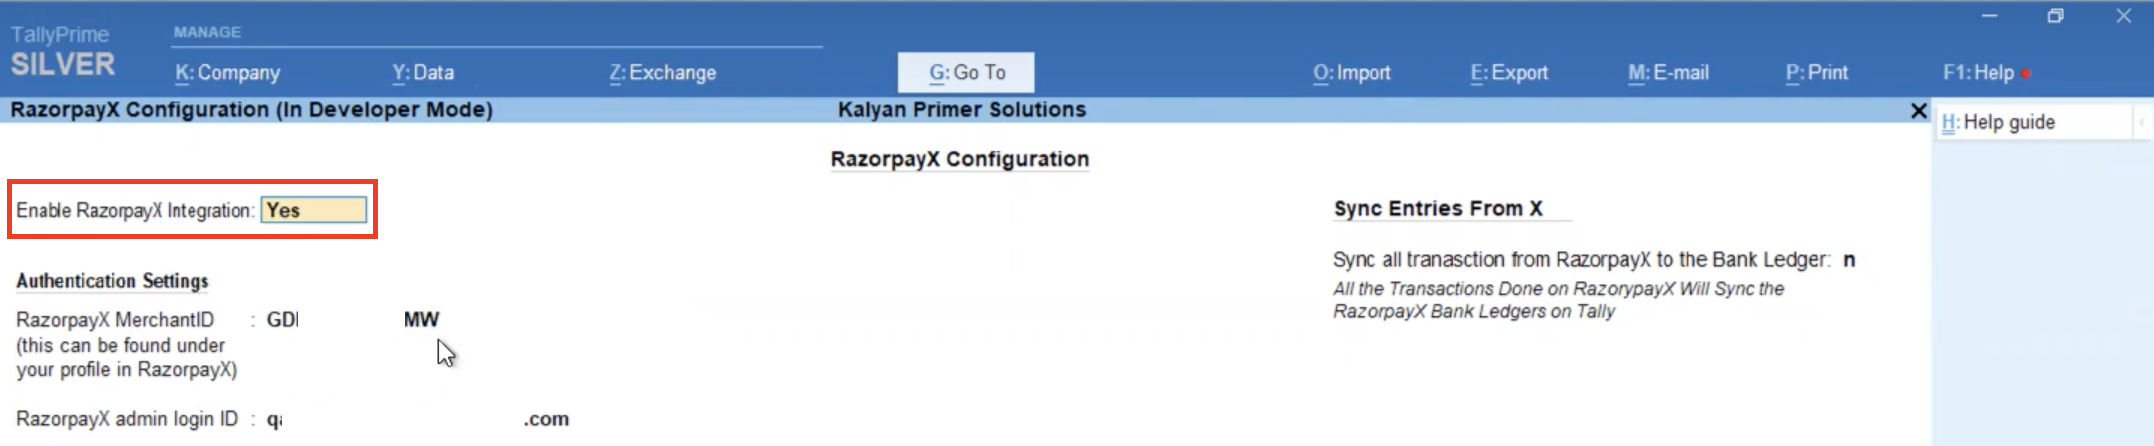 Say Yes against Enable RazorpayX Integration in Tally Prime